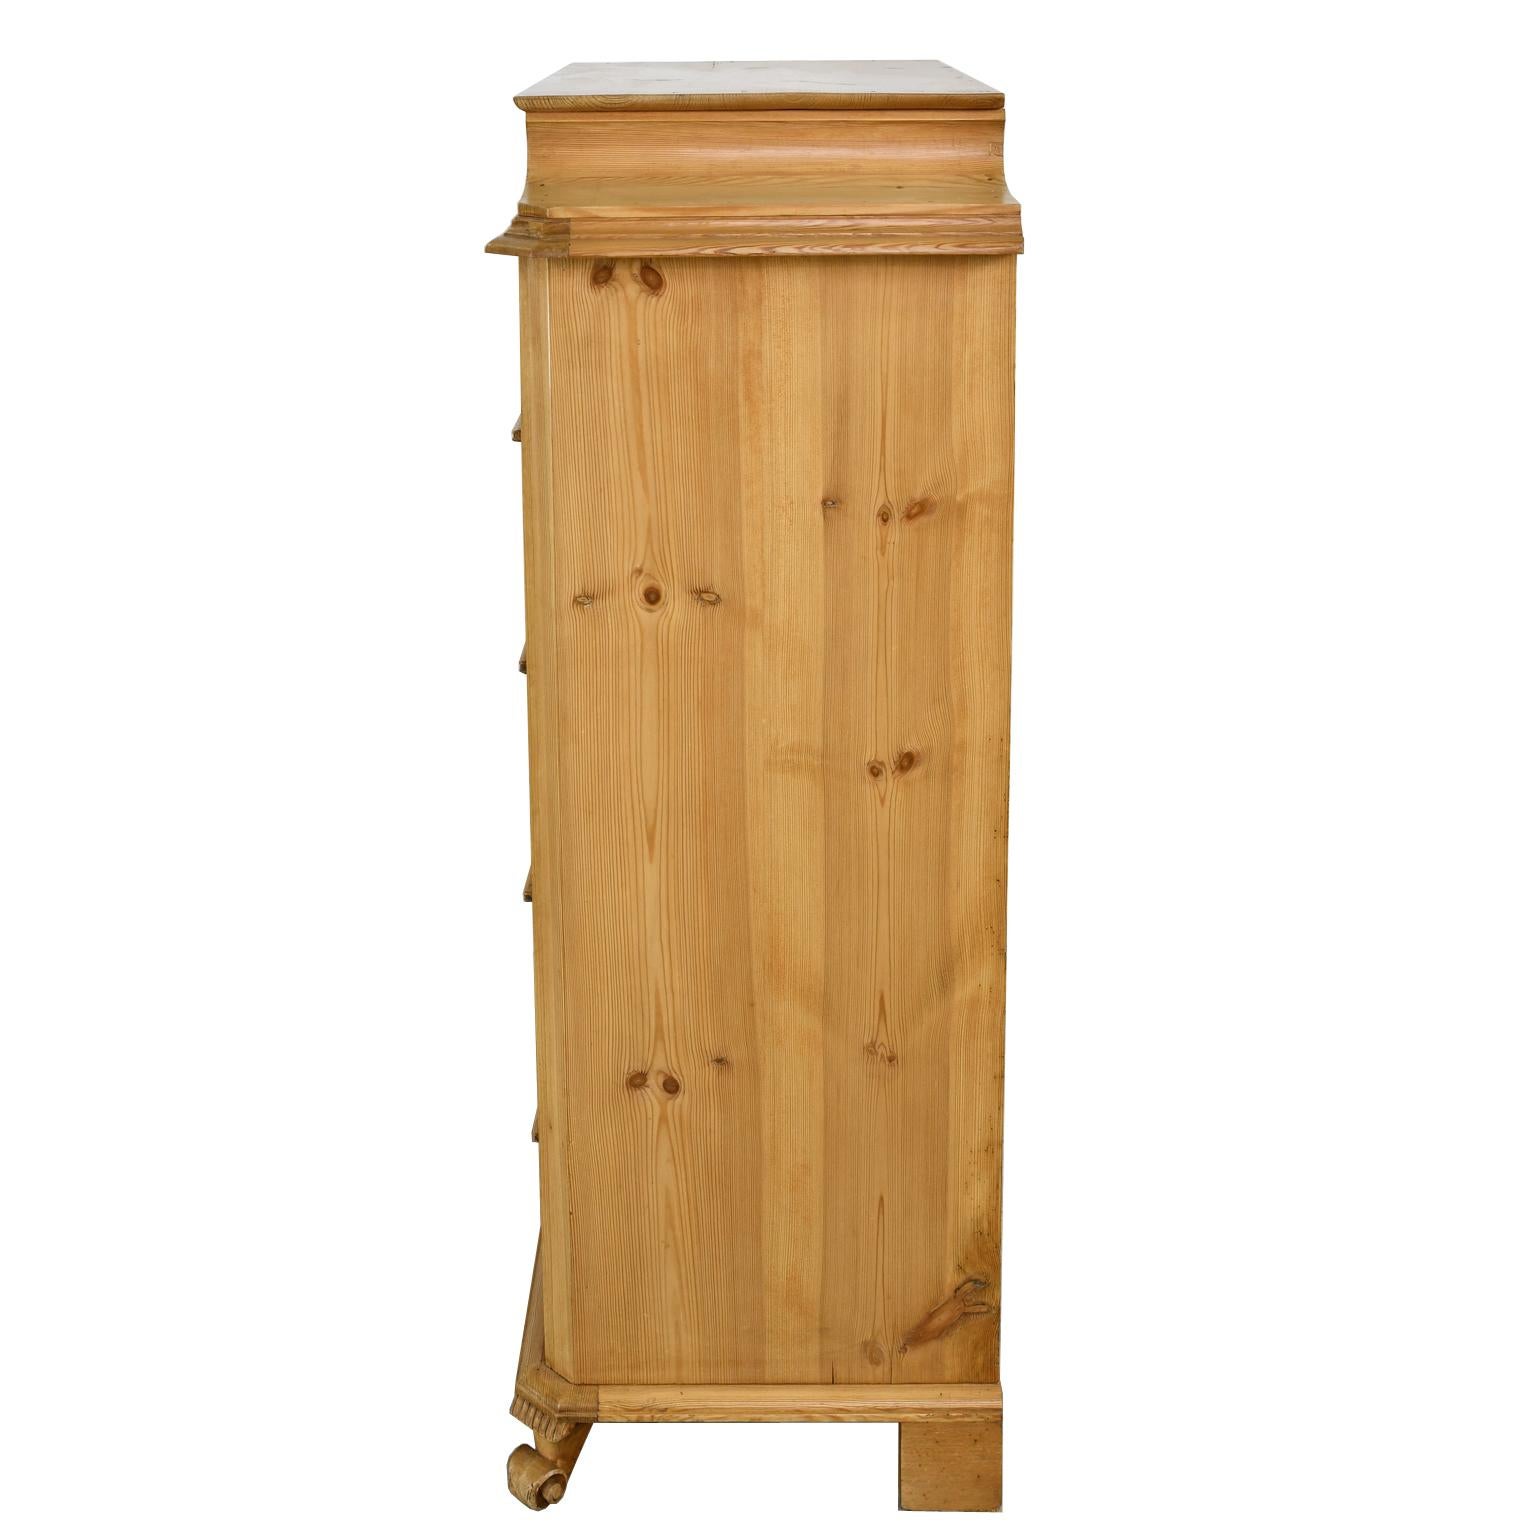 Danish Tall Chest of Drawers in Pine with 6 Drawers, Denmark, circa 1850